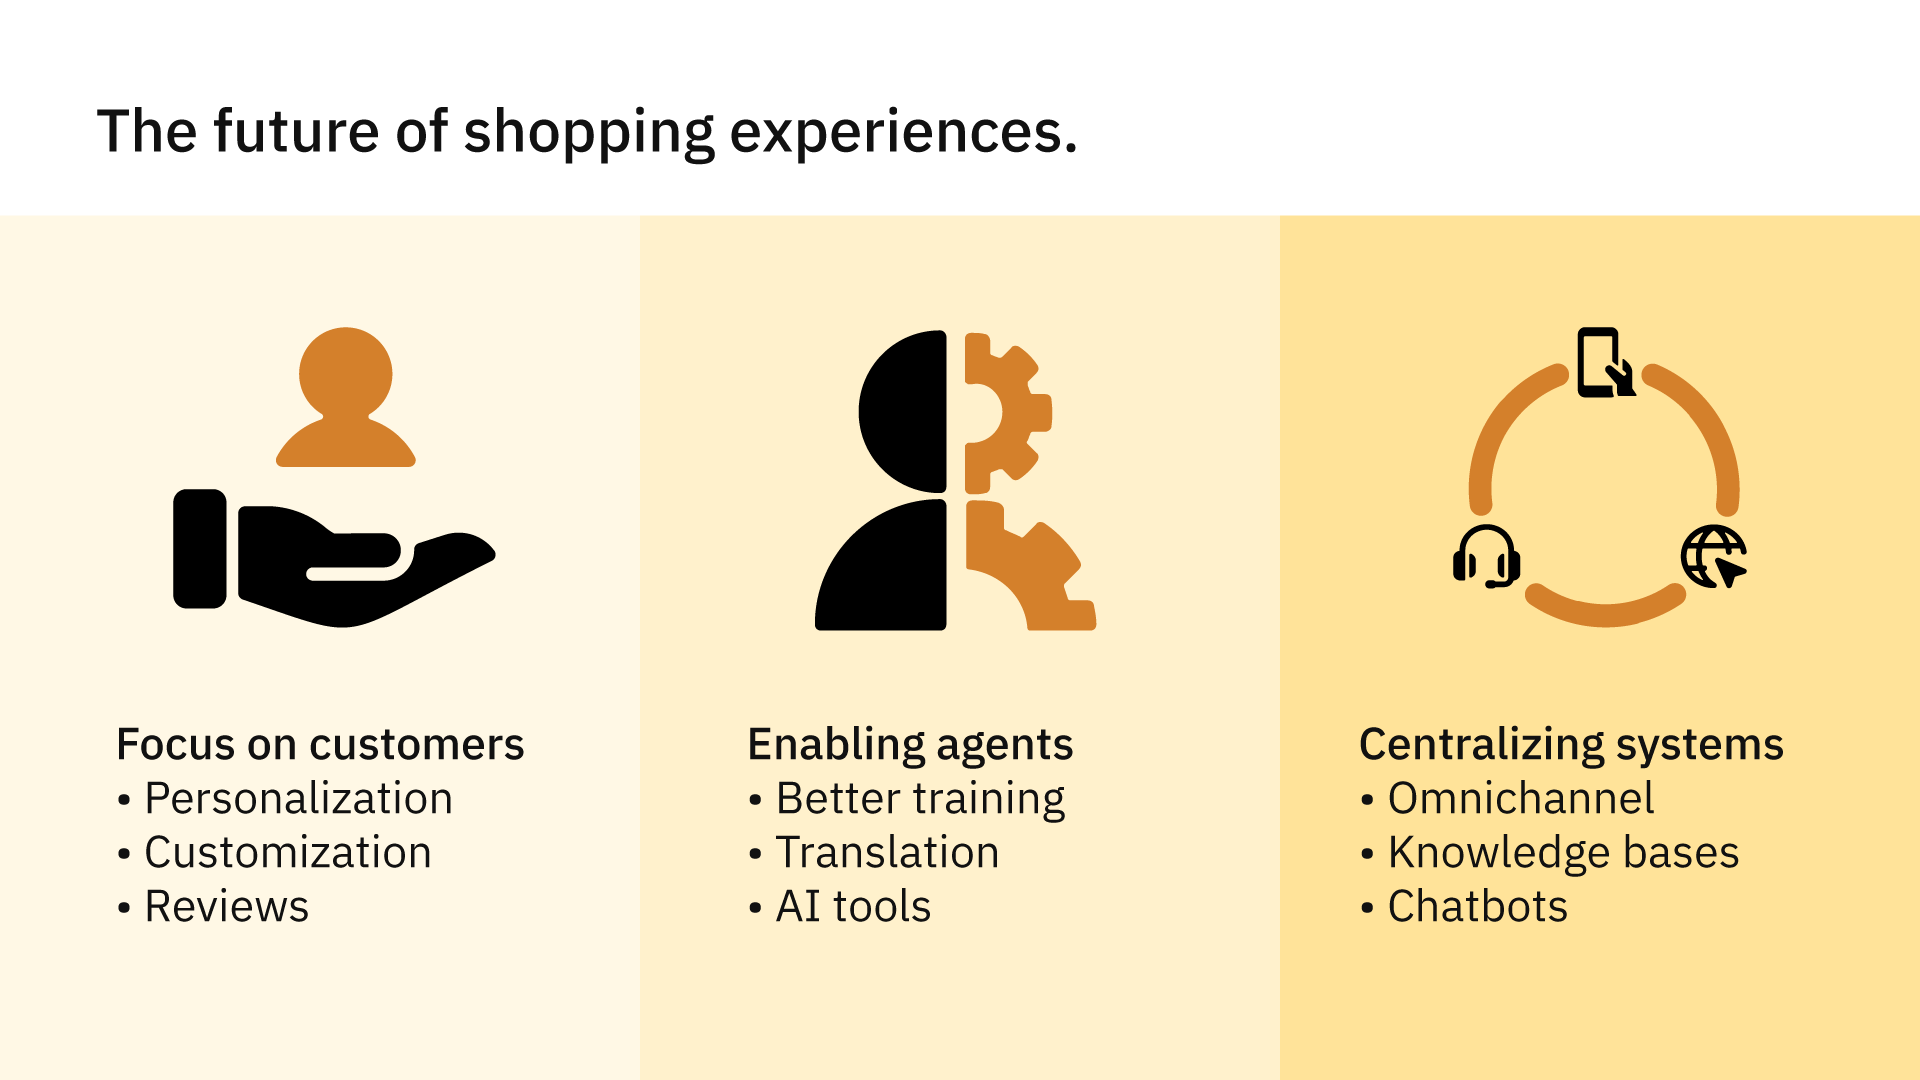 The future of shopping experiences.